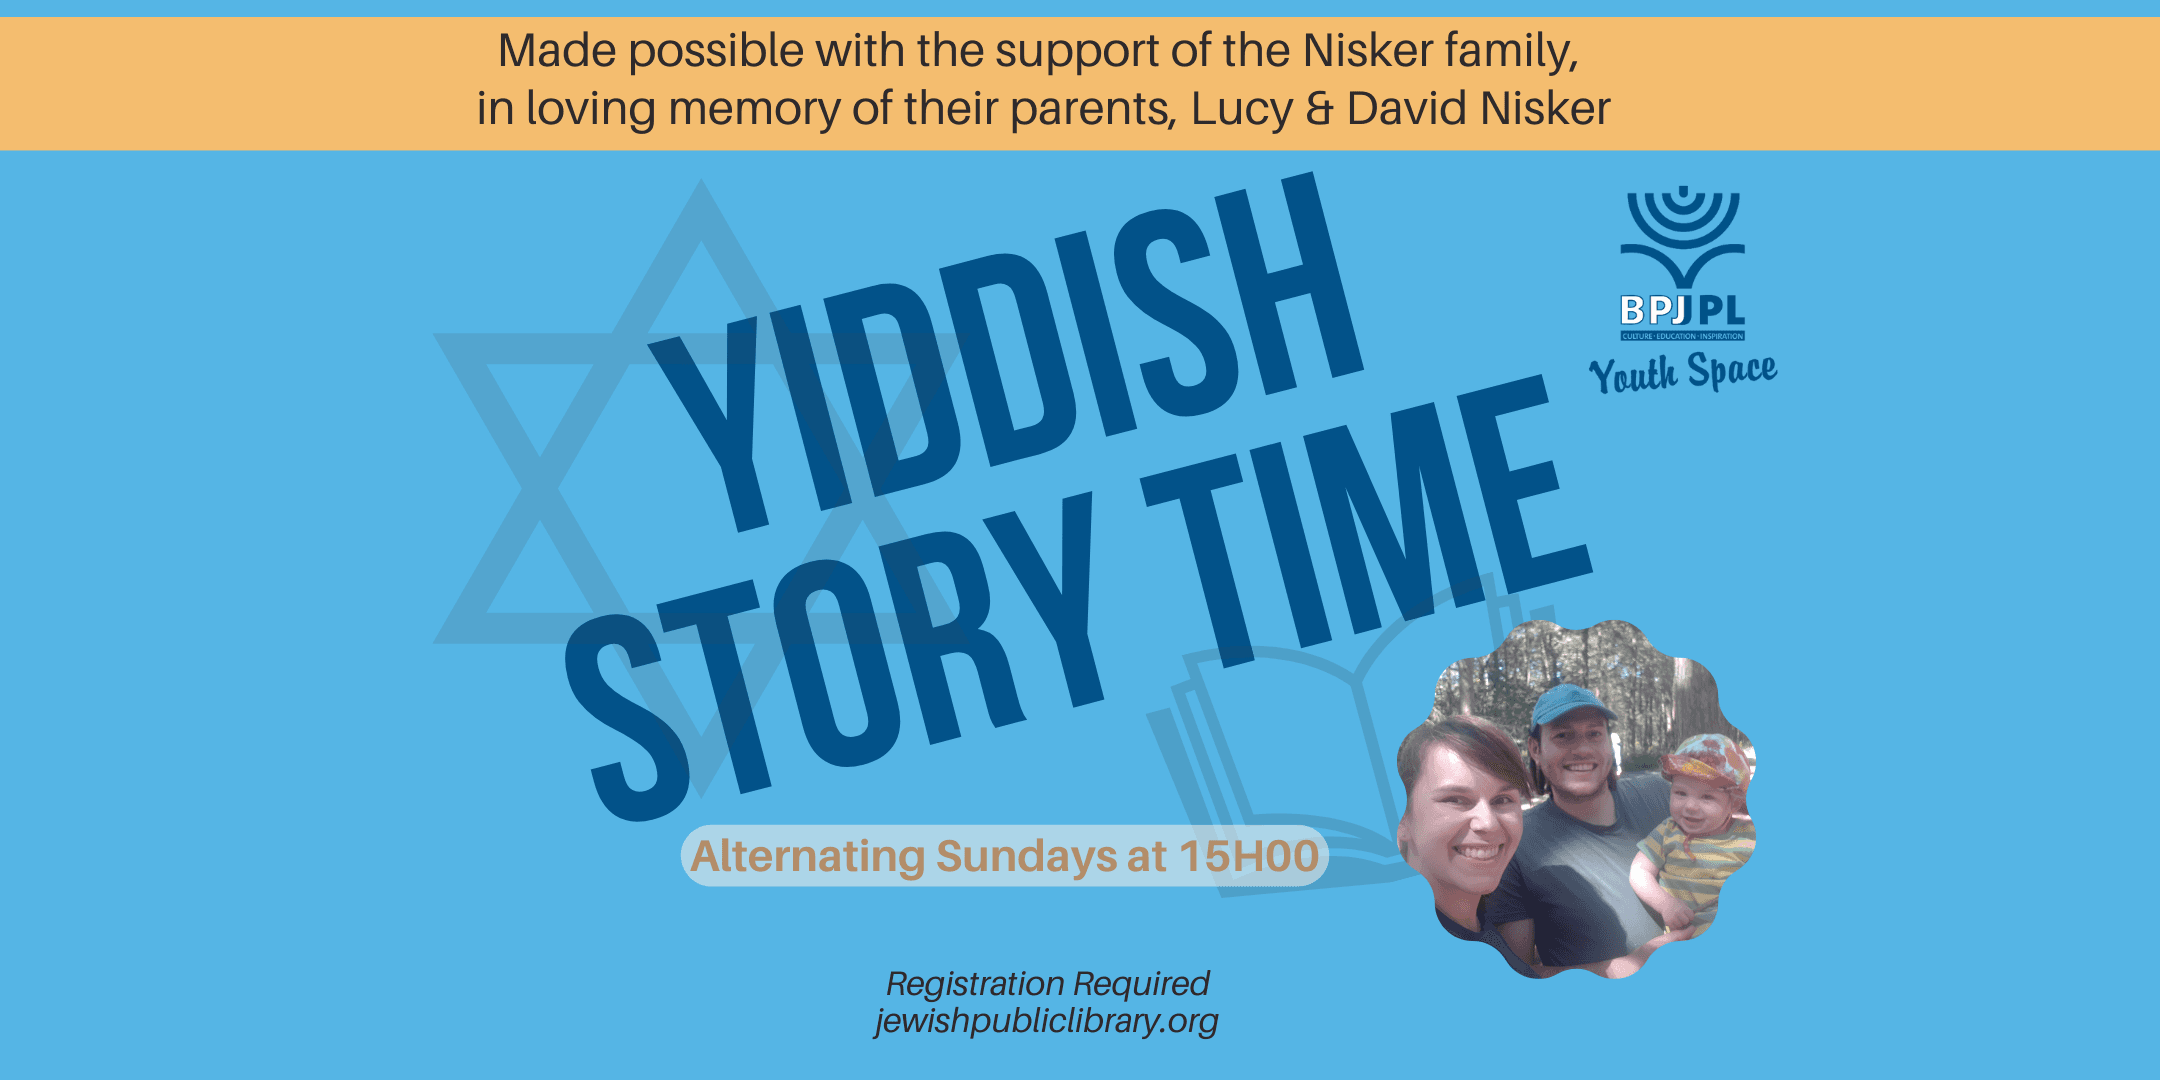 yiddish storytime - eventbrite banner (2160 × 1080 px) (1)-20230906-172746.png